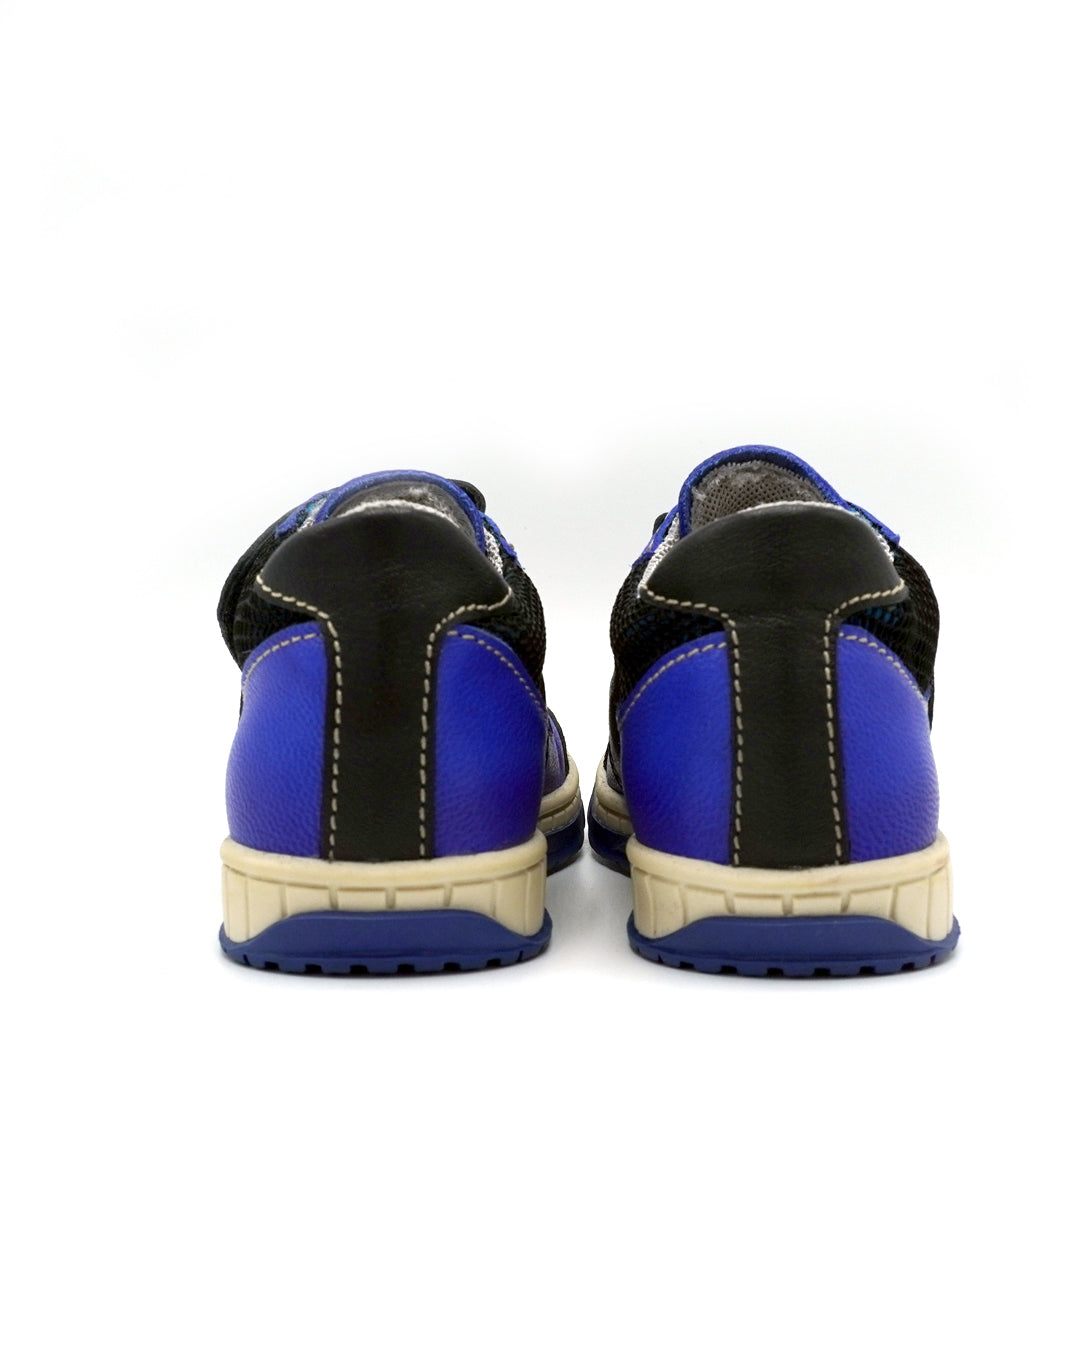 Blue Leather Shoes with Double-straps for Toddlers